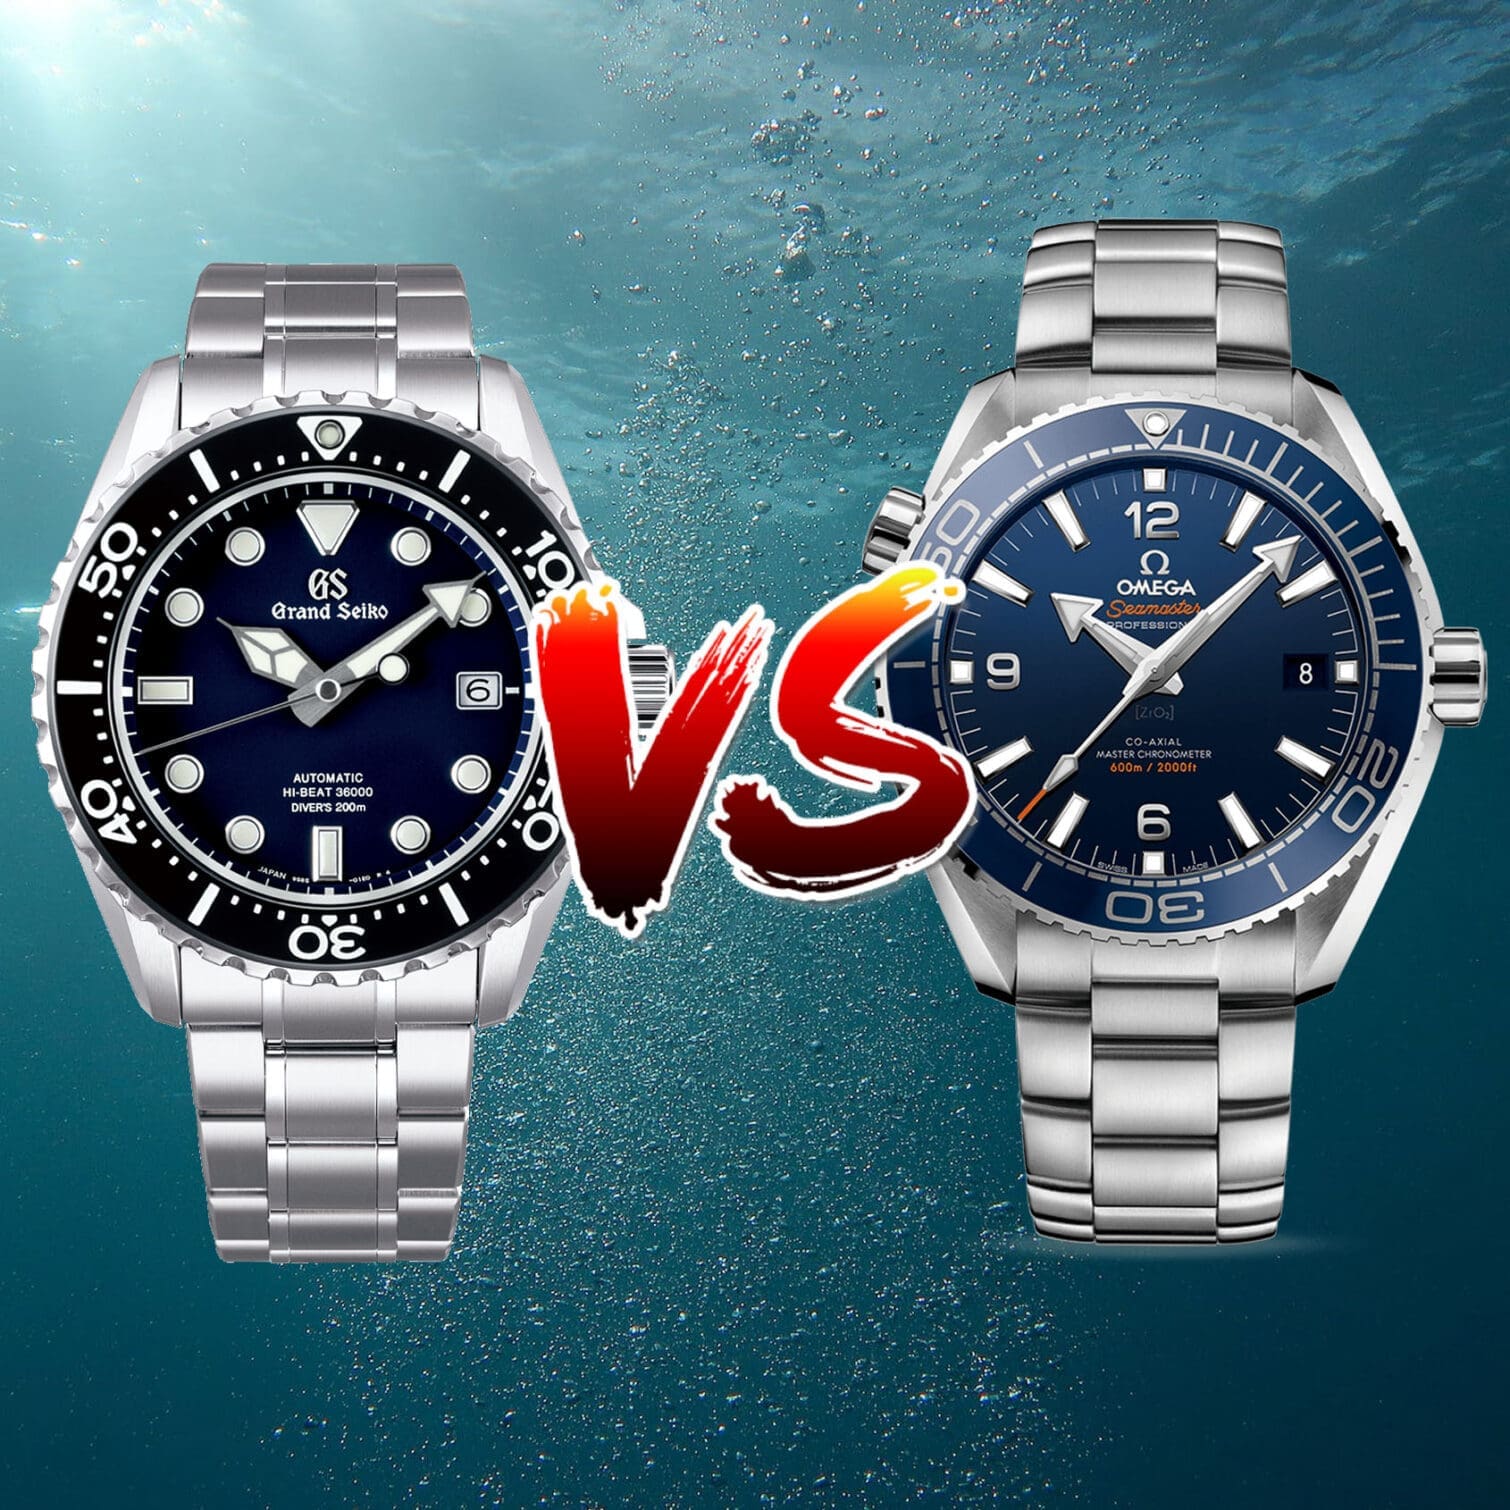 VERSUS: The Grand Seiko SBGH289 and Omega Seamaster Planet Ocean 600M divers duke it out